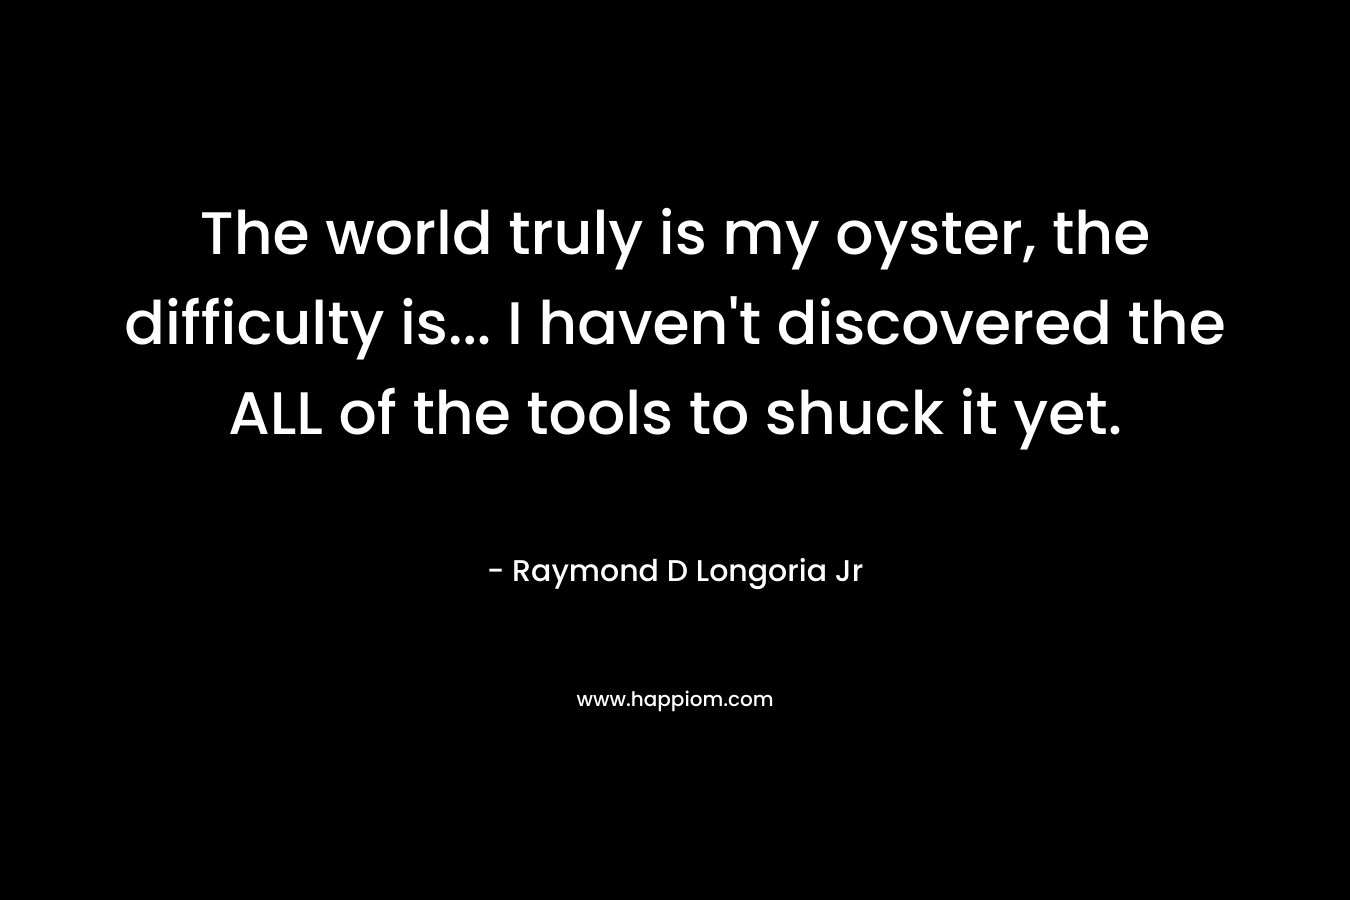 The world truly is my oyster, the difficulty is... I haven't discovered the ALL of the tools to shuck it yet.